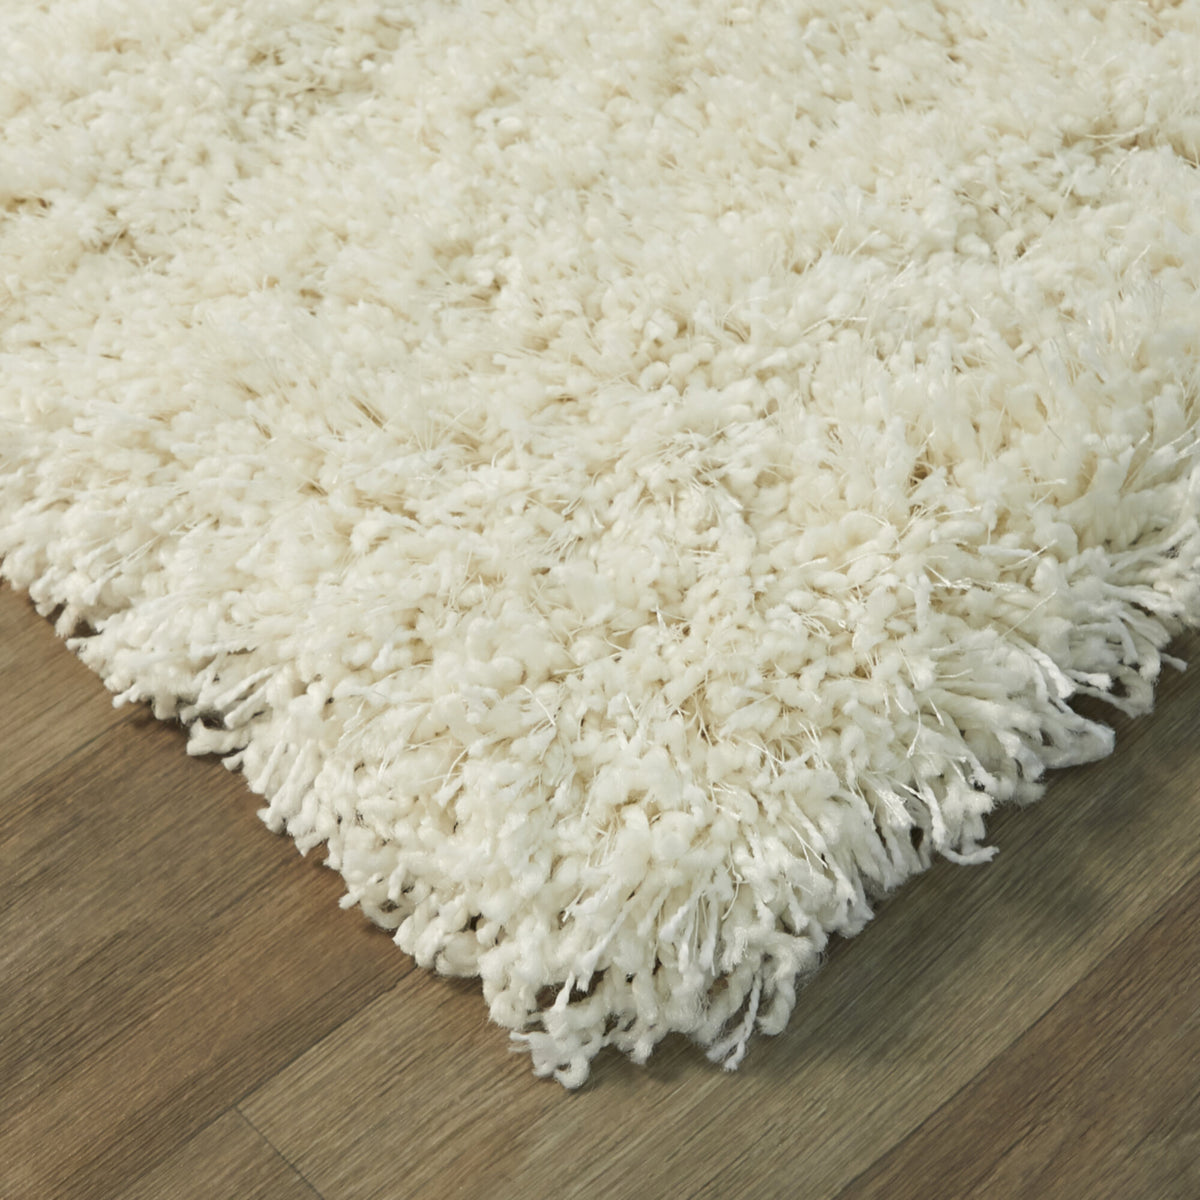 Trevail Solid Shag Area Rug